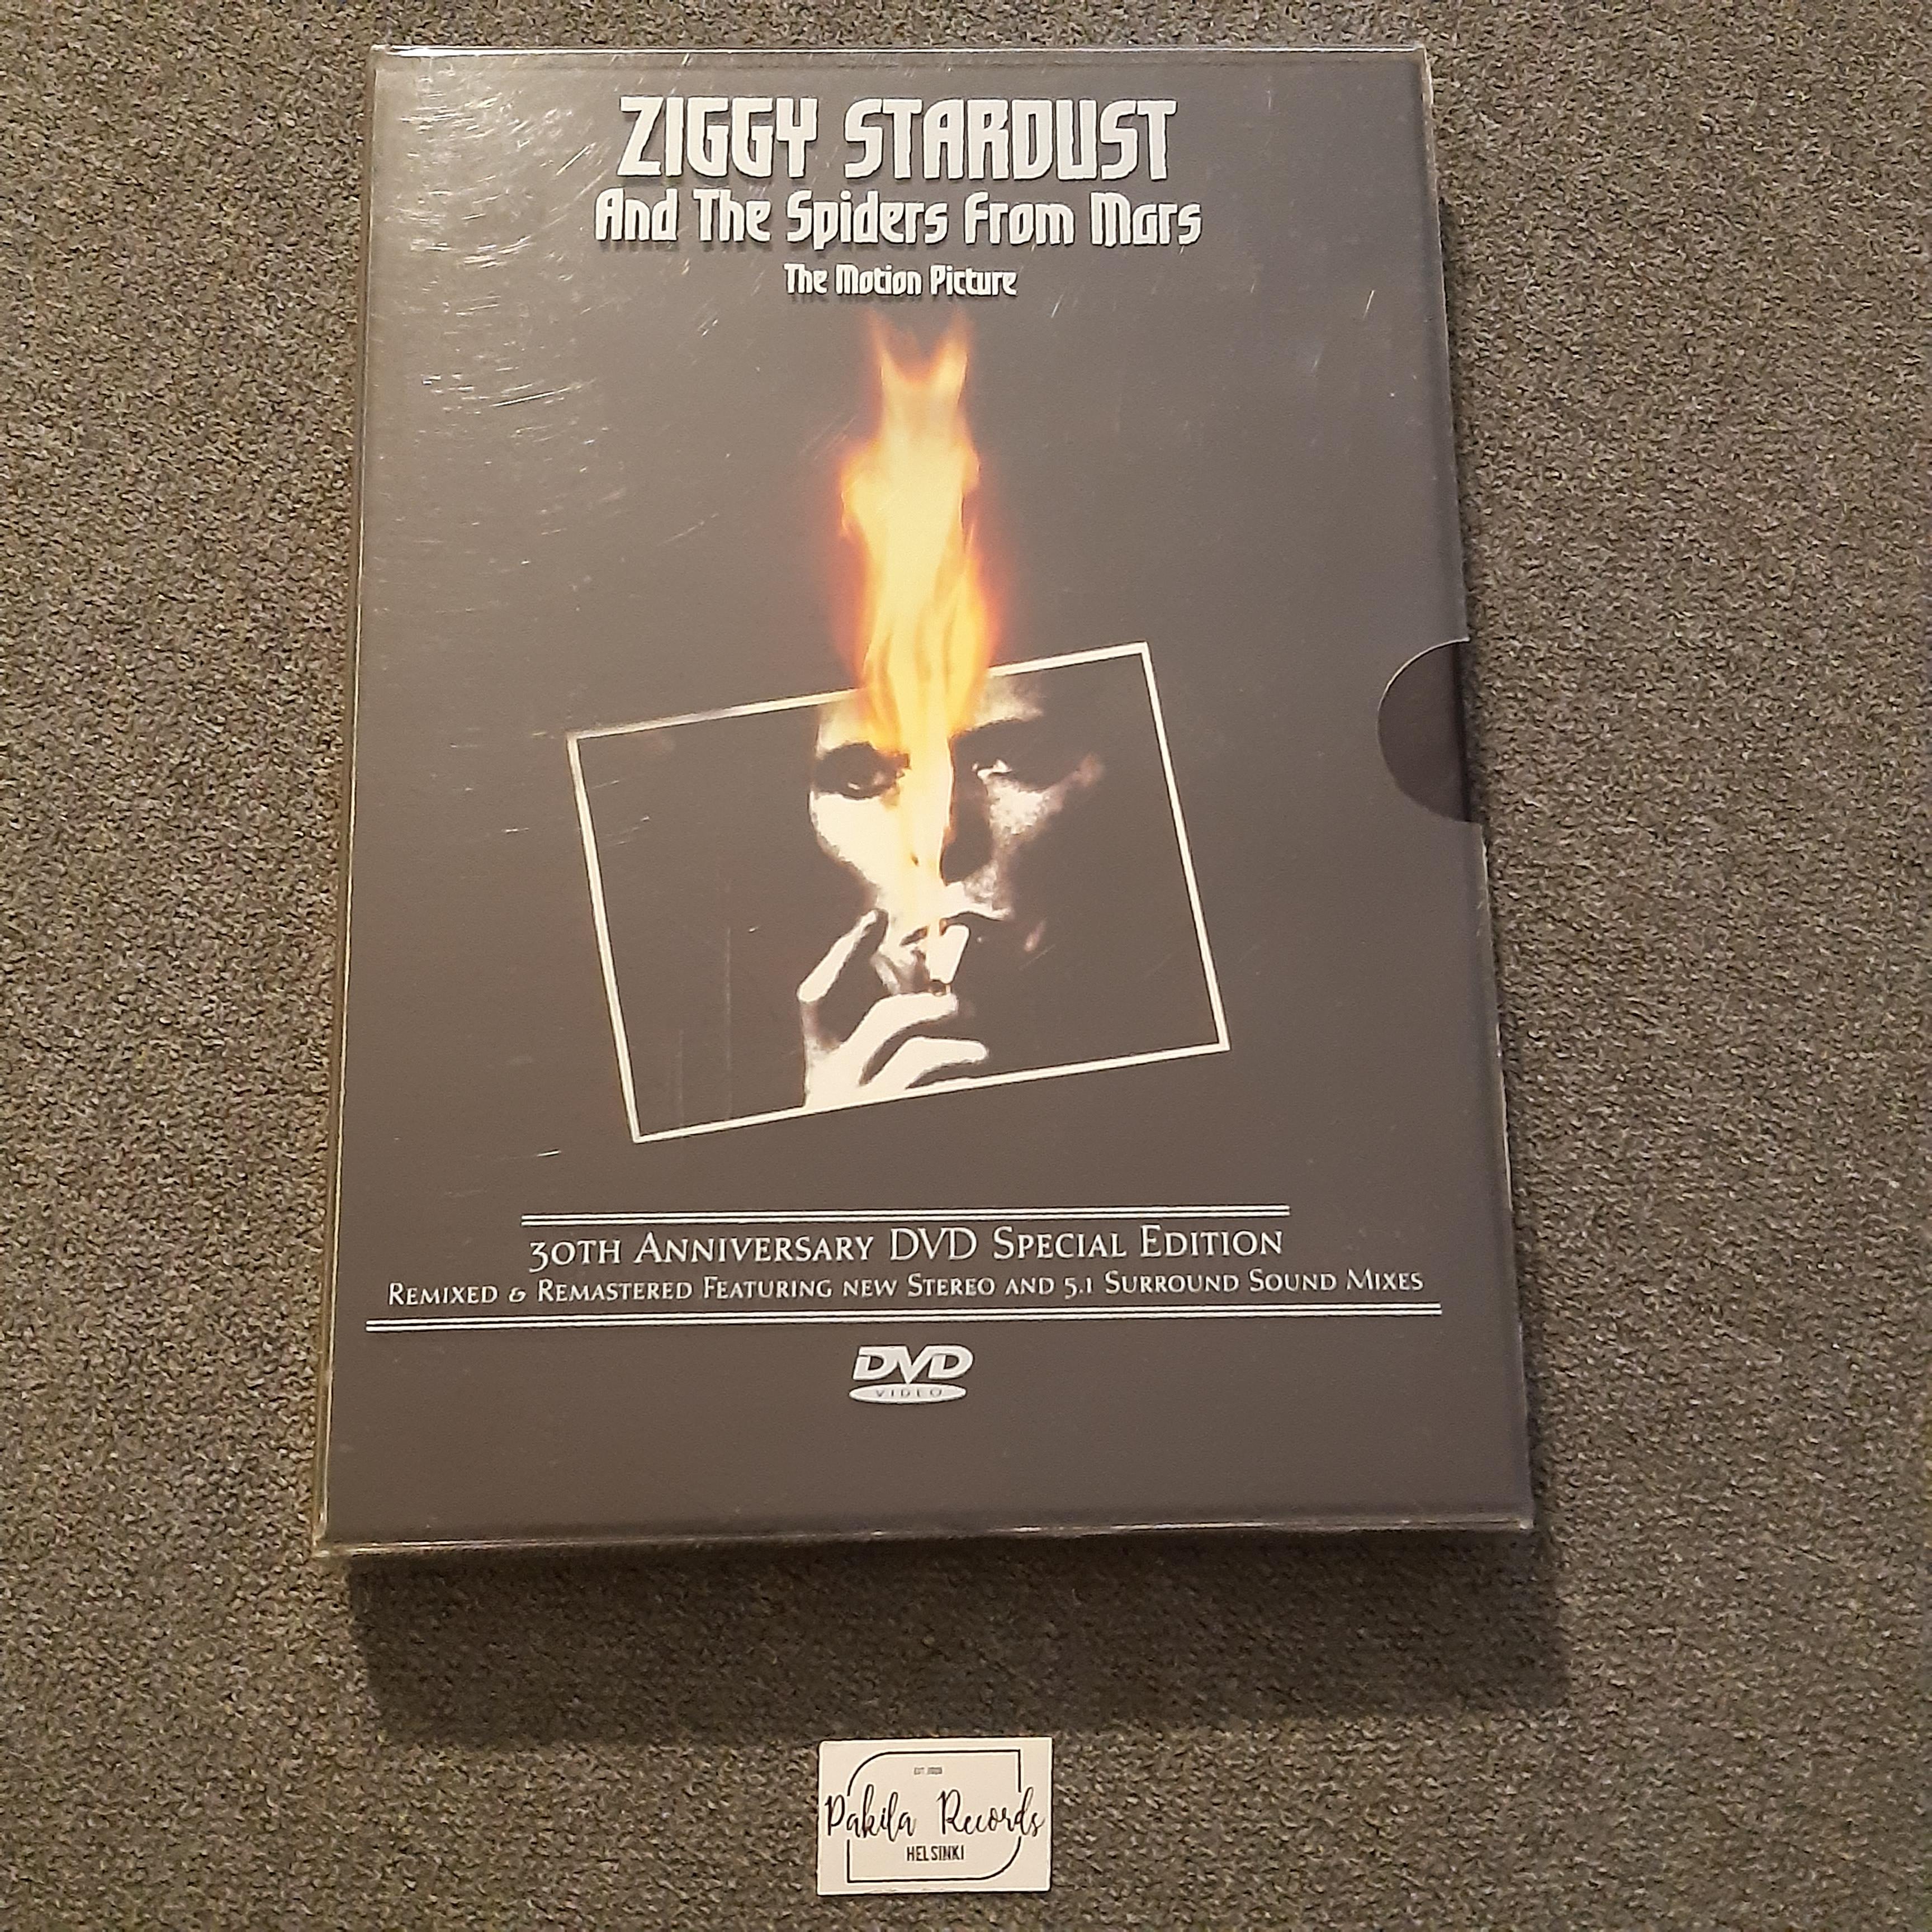 David Bowie - Ziggy Stardust And The Spiders From Mars - DVD (käytetty)